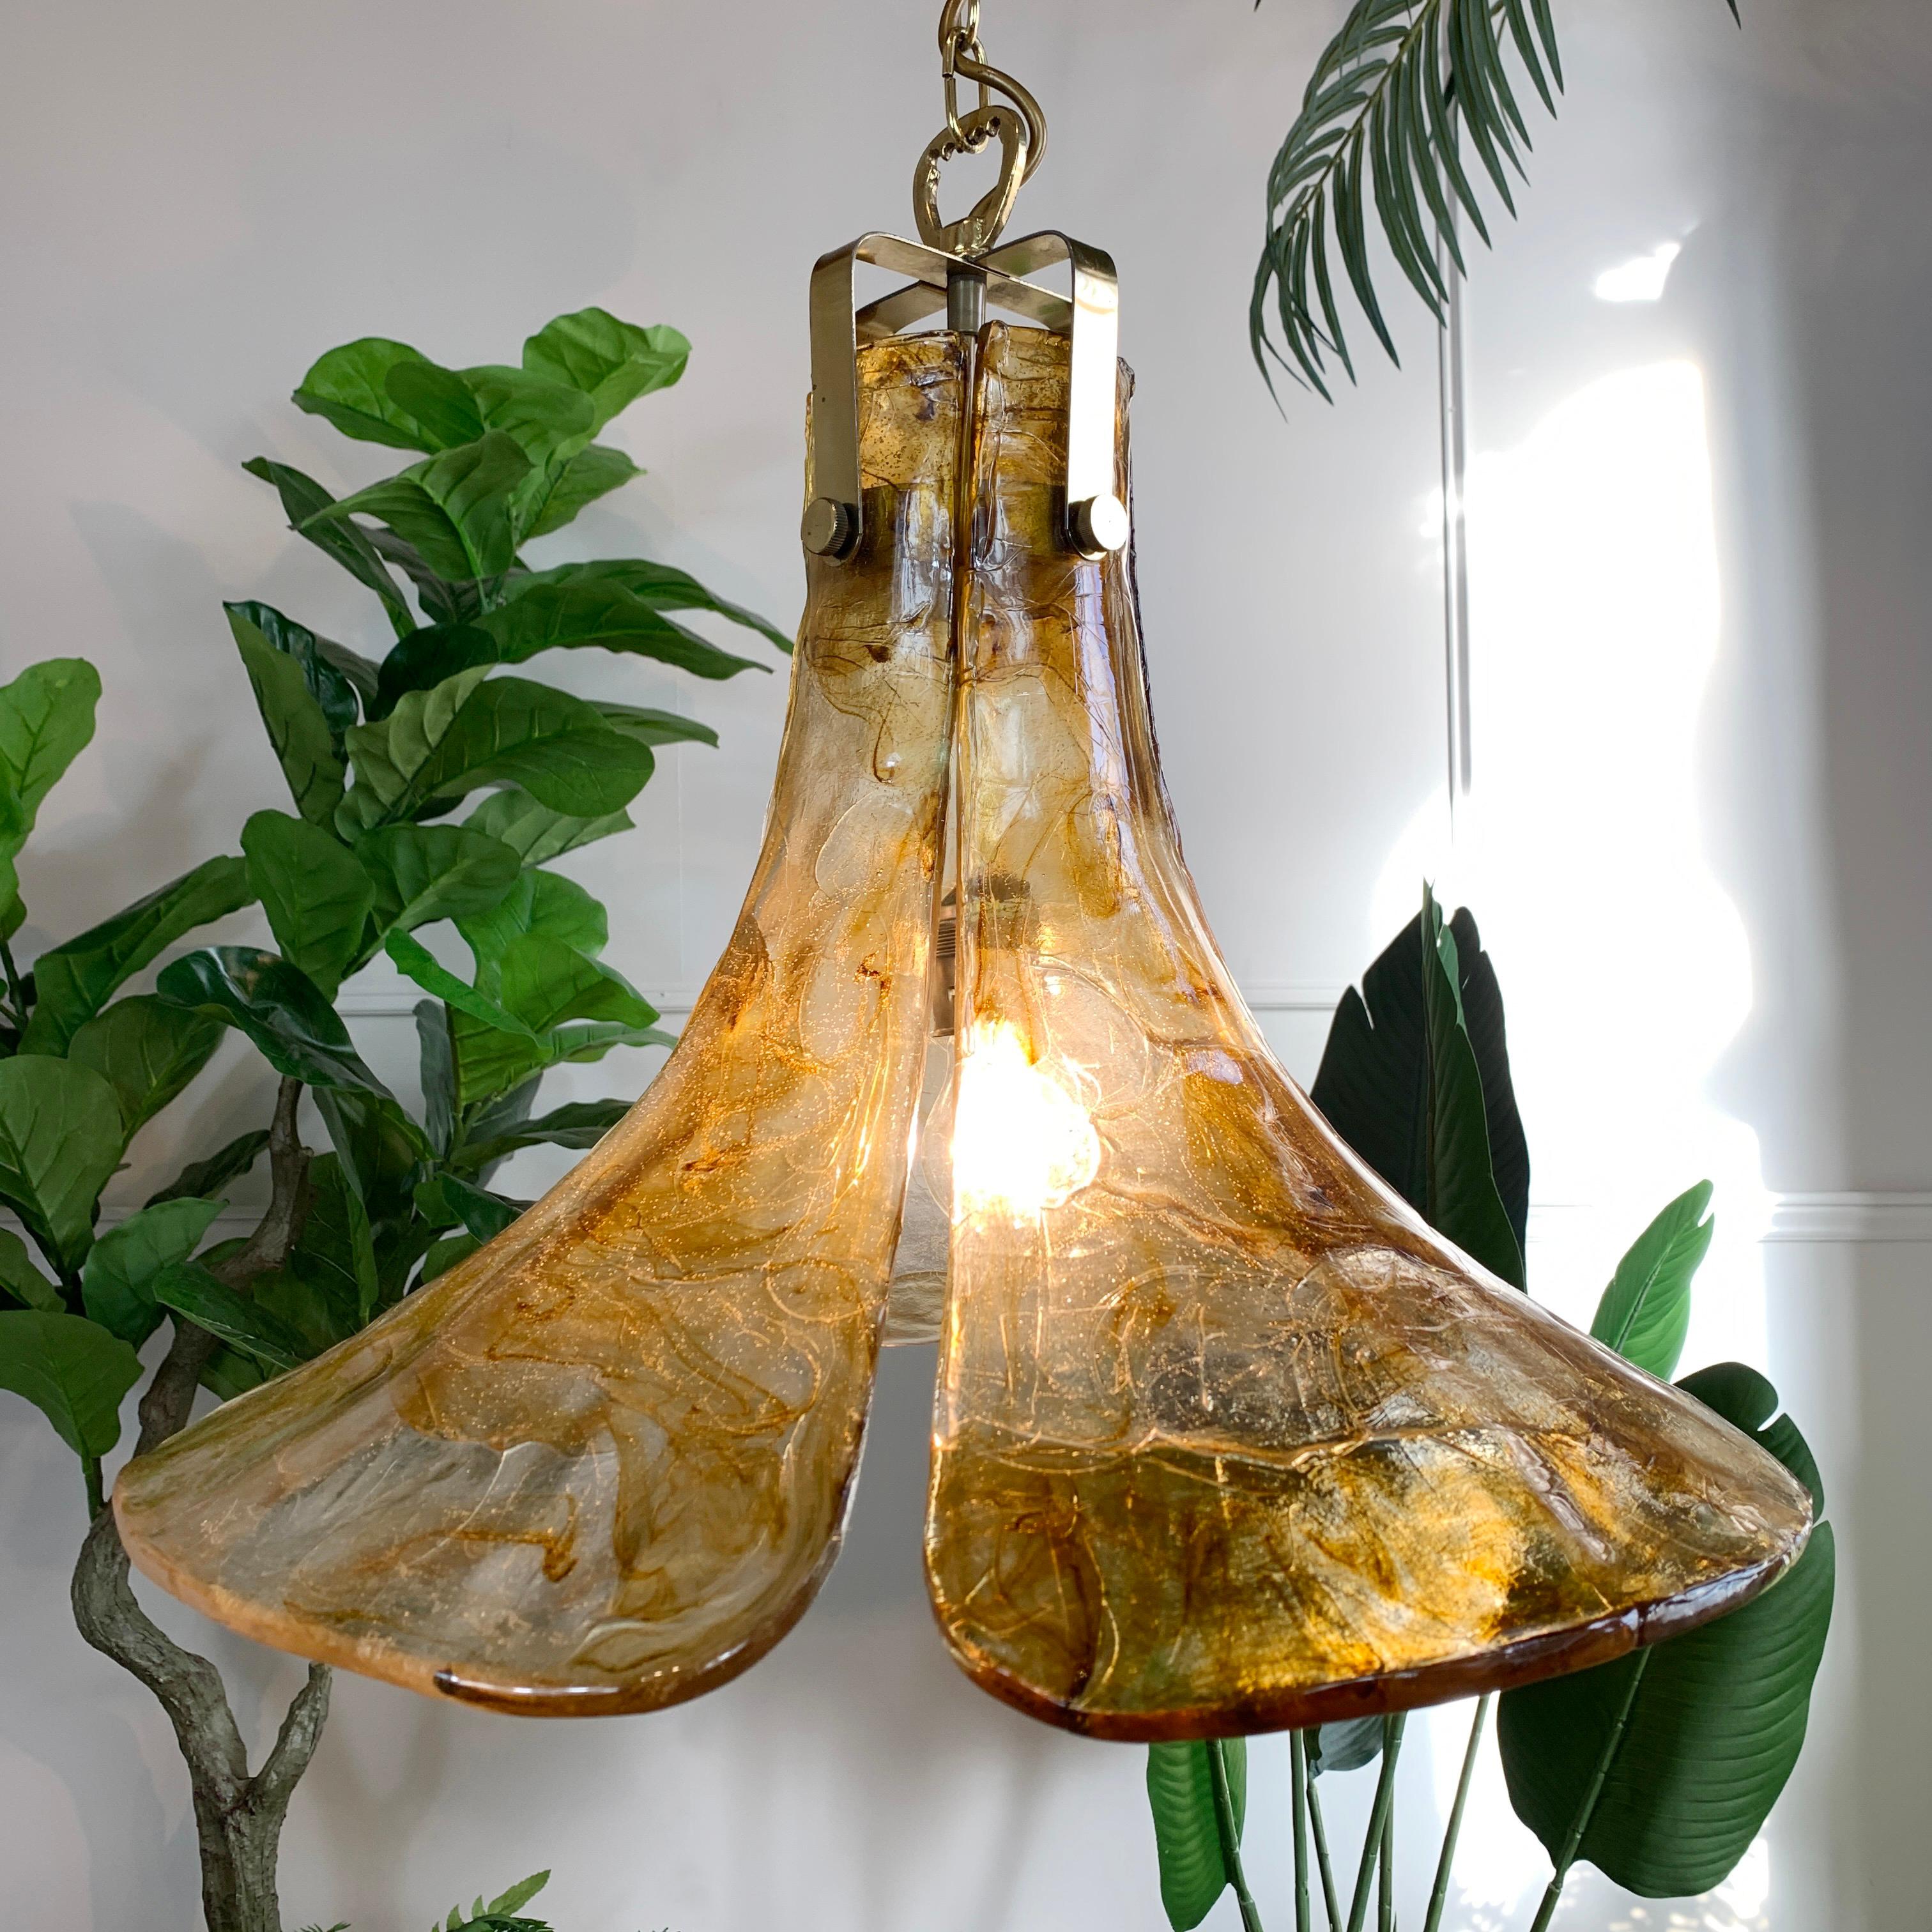 A superb amber and clear tulip flower ceiling pendant. Very much in the manner of Carlo Nason, the brass fitting takes a single large screw in bulb, the four detachable petals that form the shade appear to be made of a quality acrylic. This is not